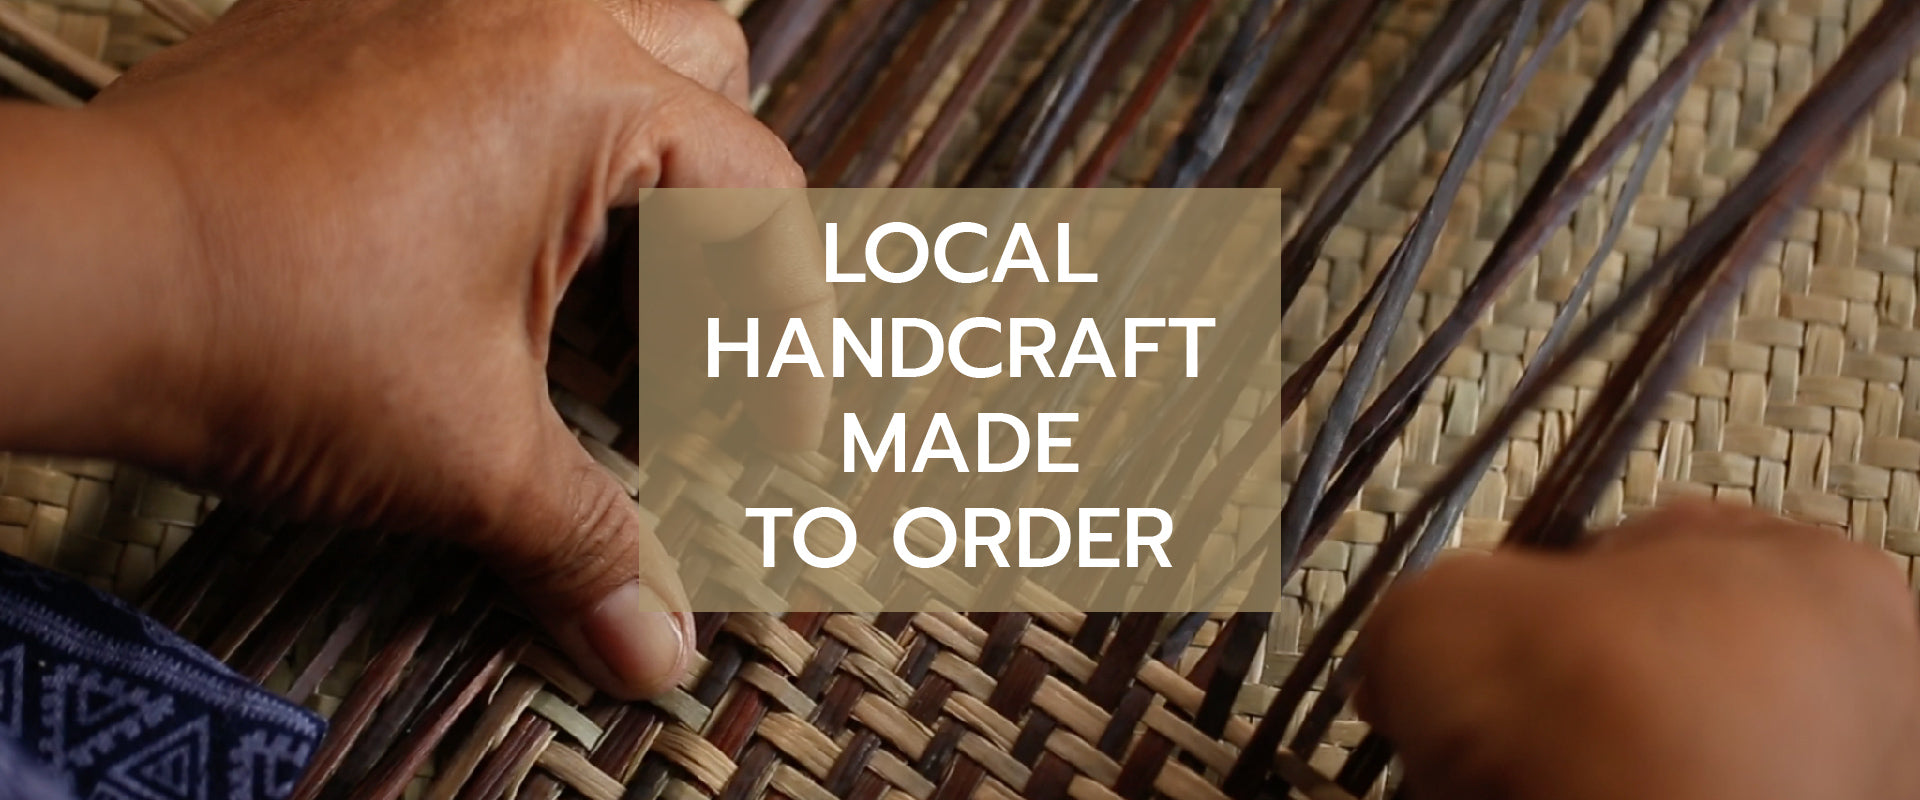 local hand craft made to order